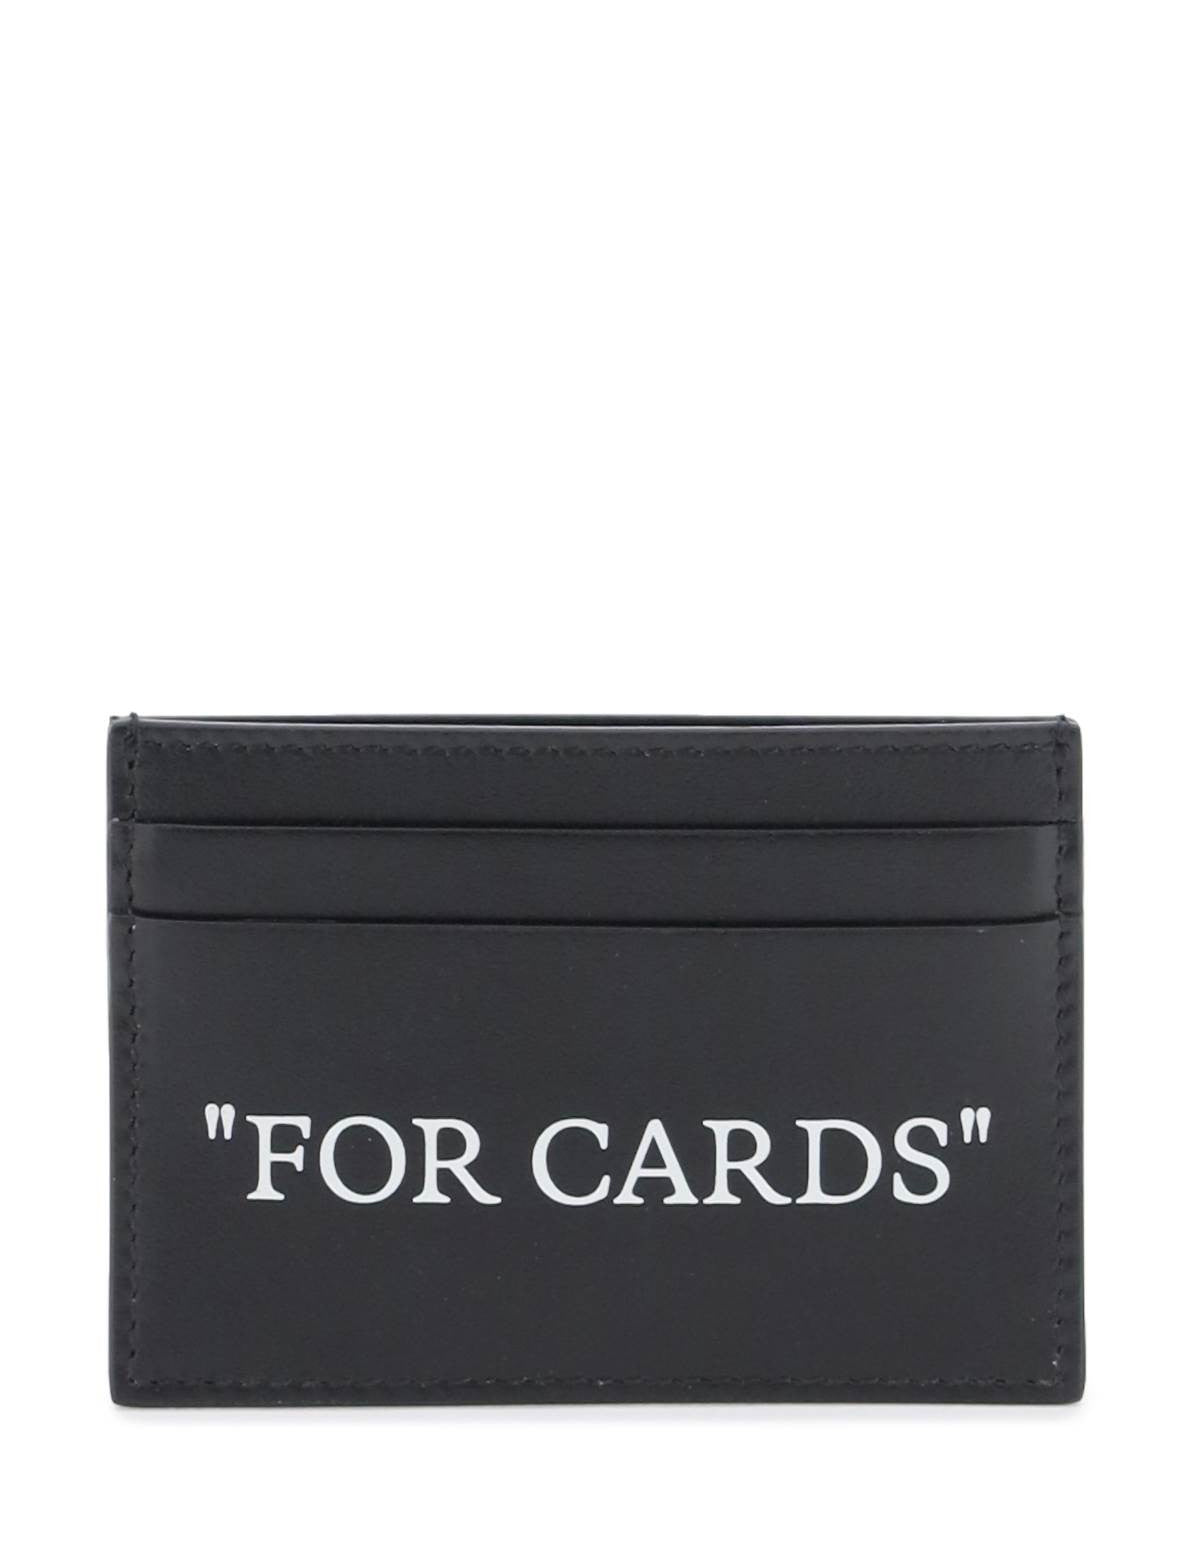 off-white-bookish-card-holder-with-lettering.jpg